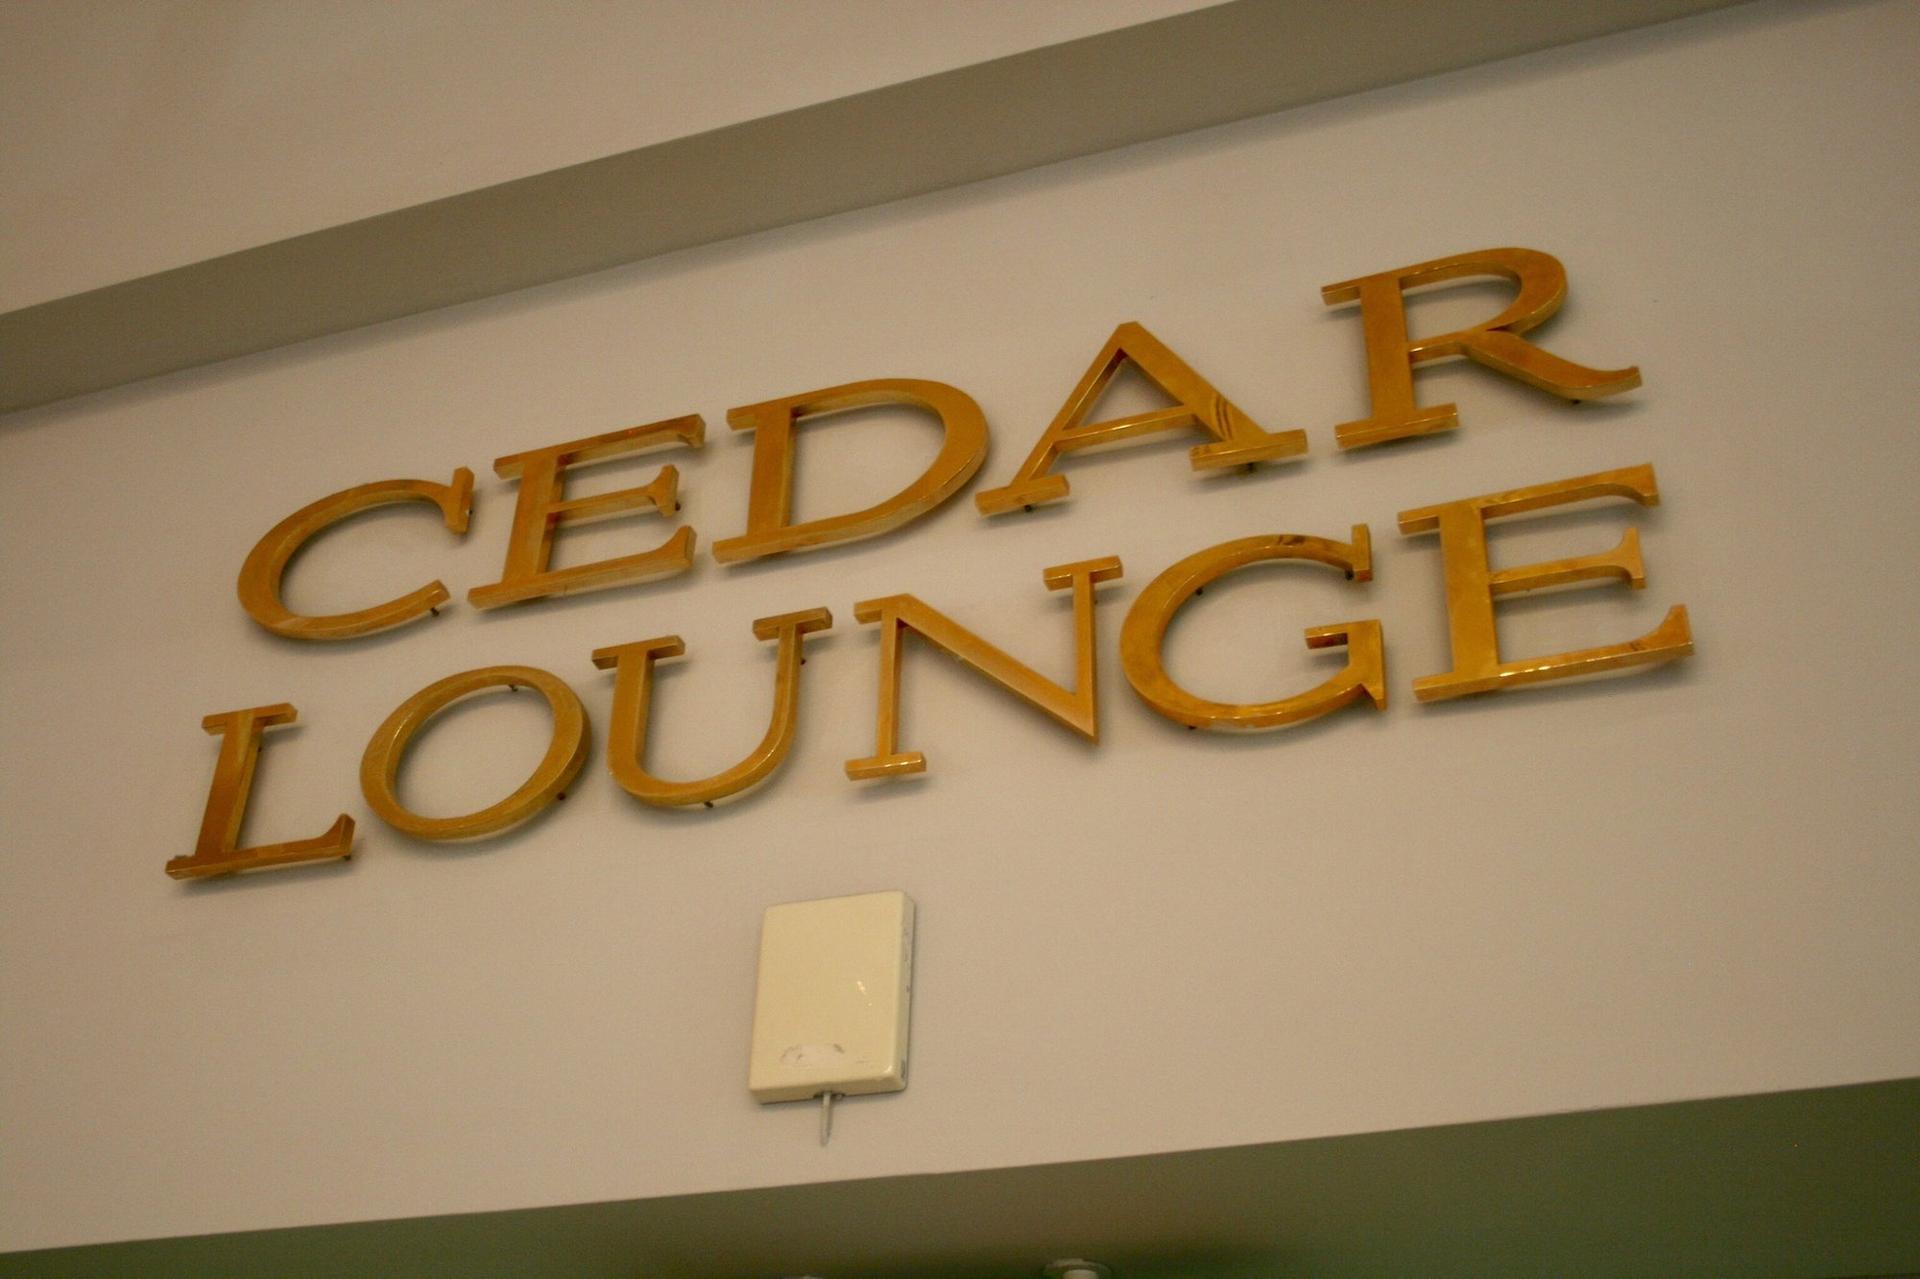 Middle East Airlines Cedar Lounge image 12 of 18